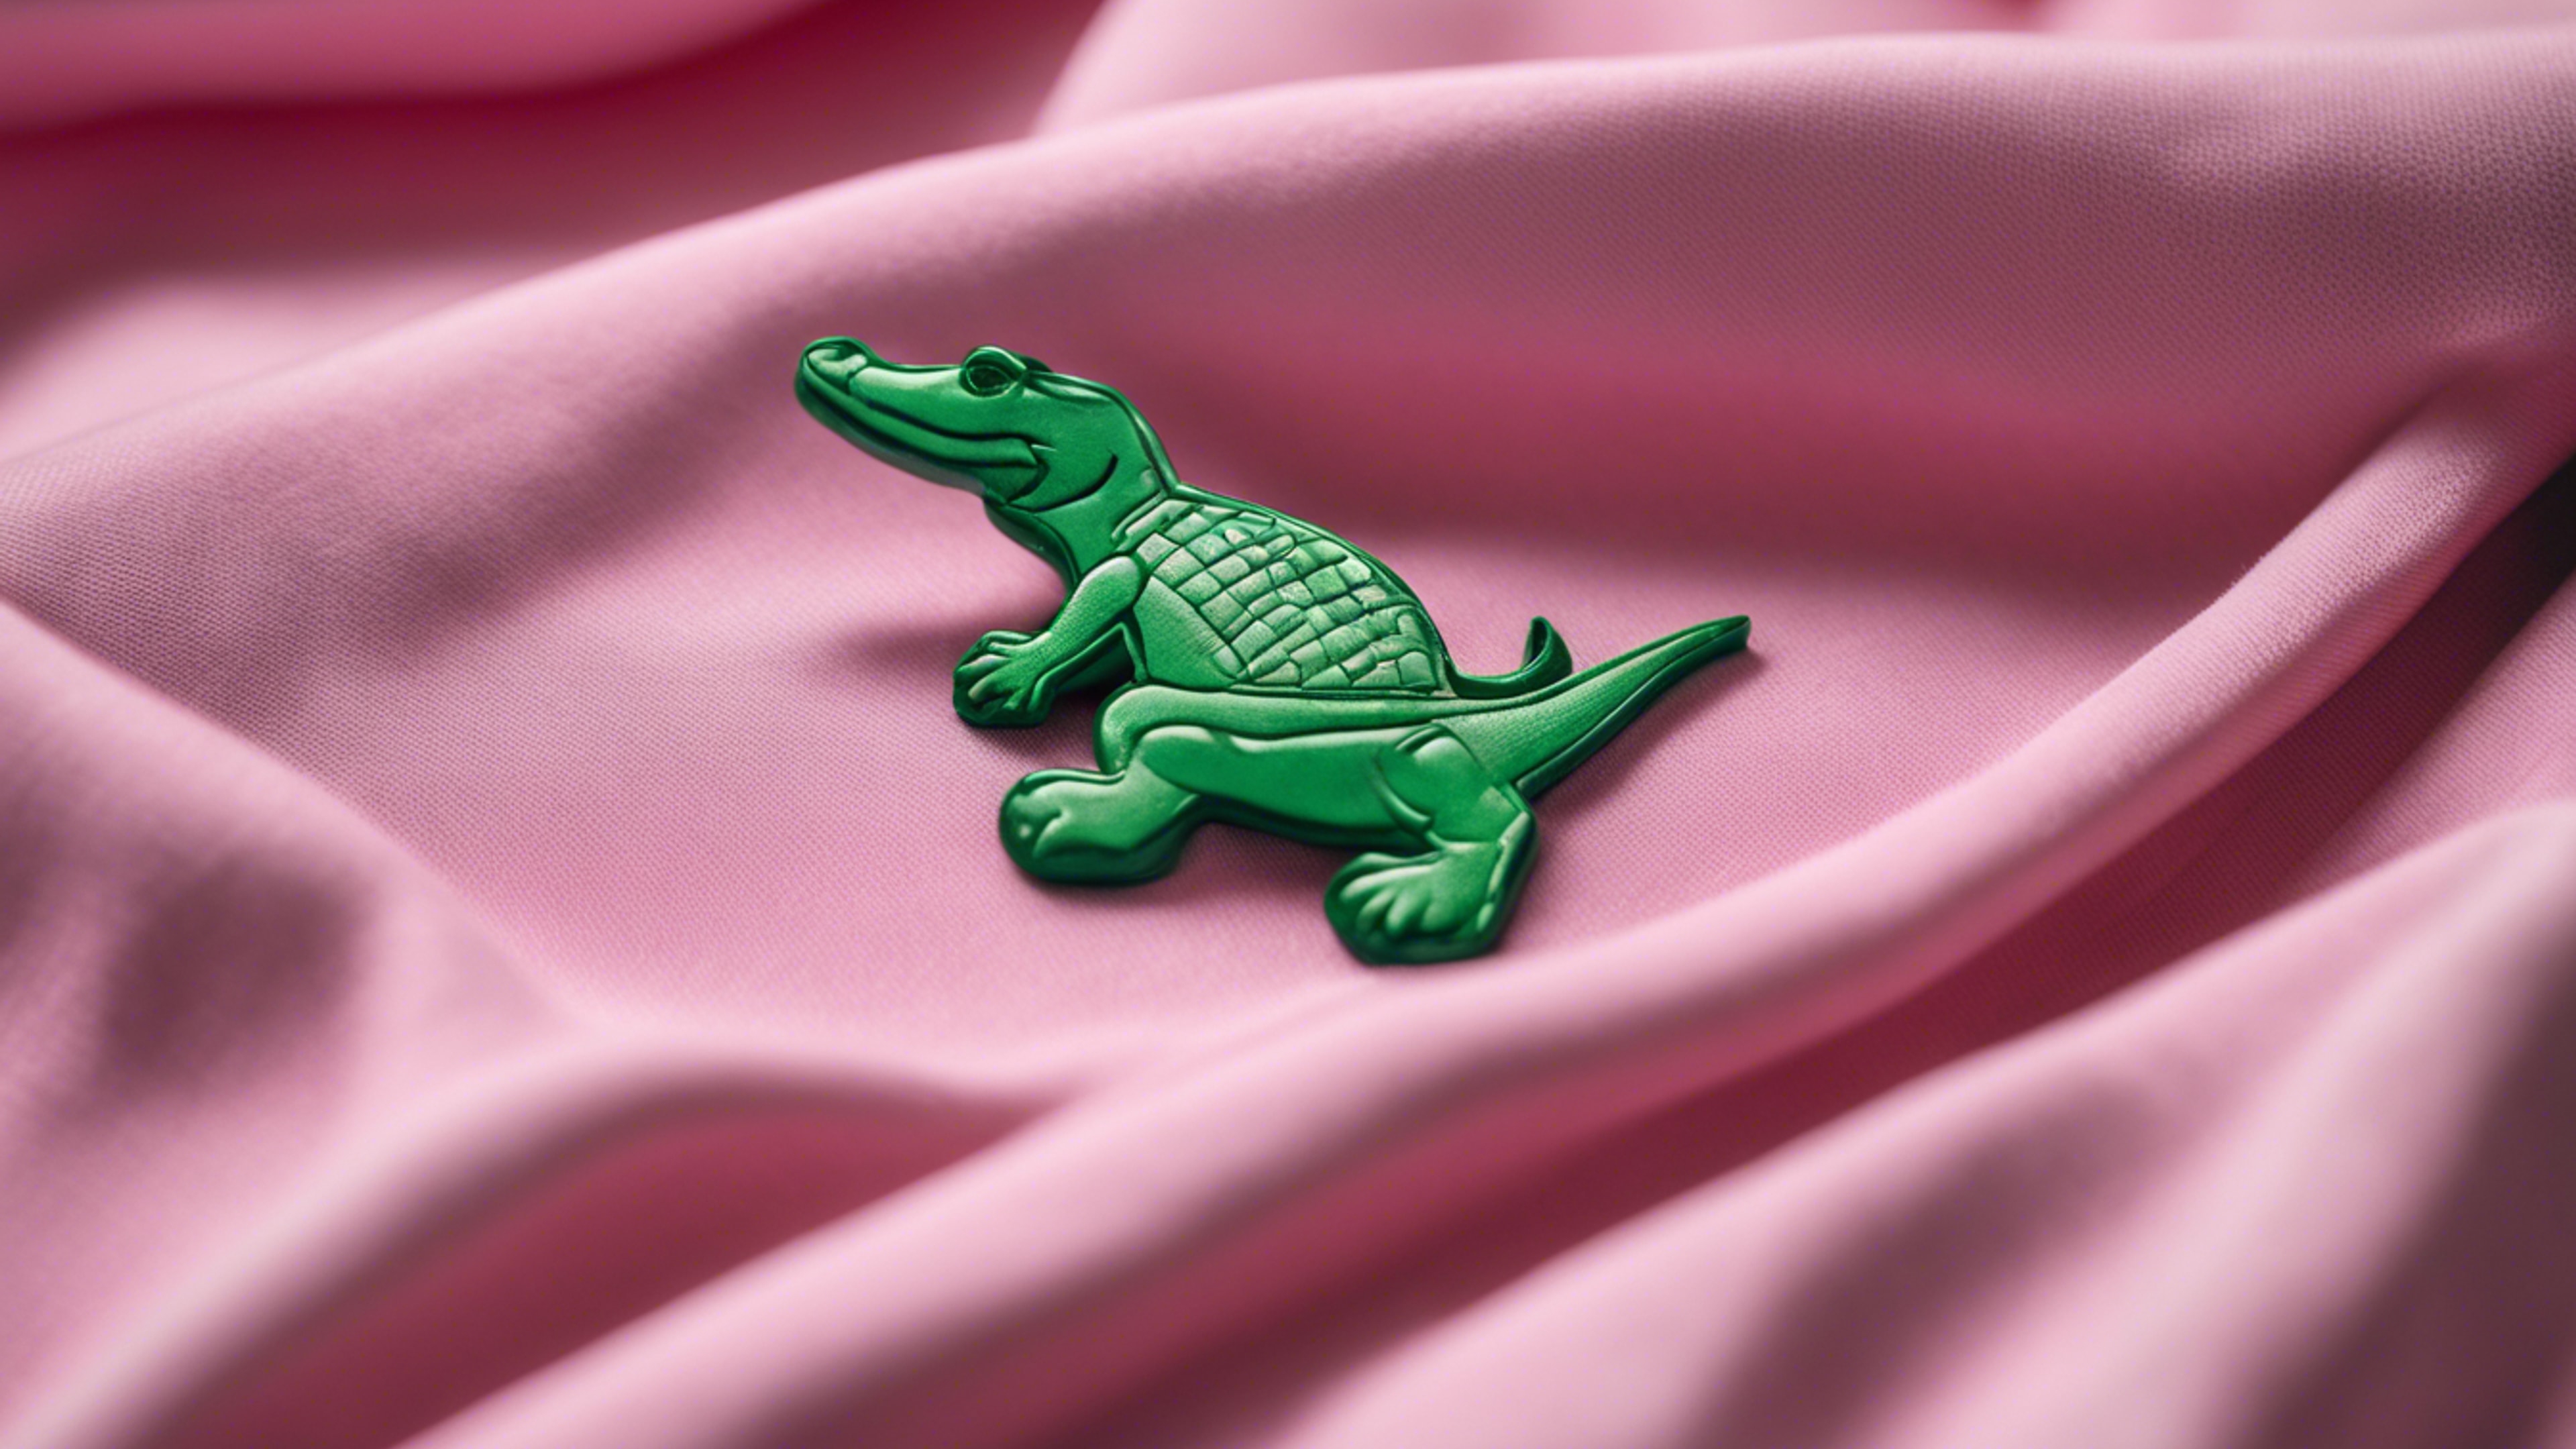 A pink polo shirt with a green alligator logo, folded neatly on a bed. Taustakuva[63d9ff960abf421e89a8]